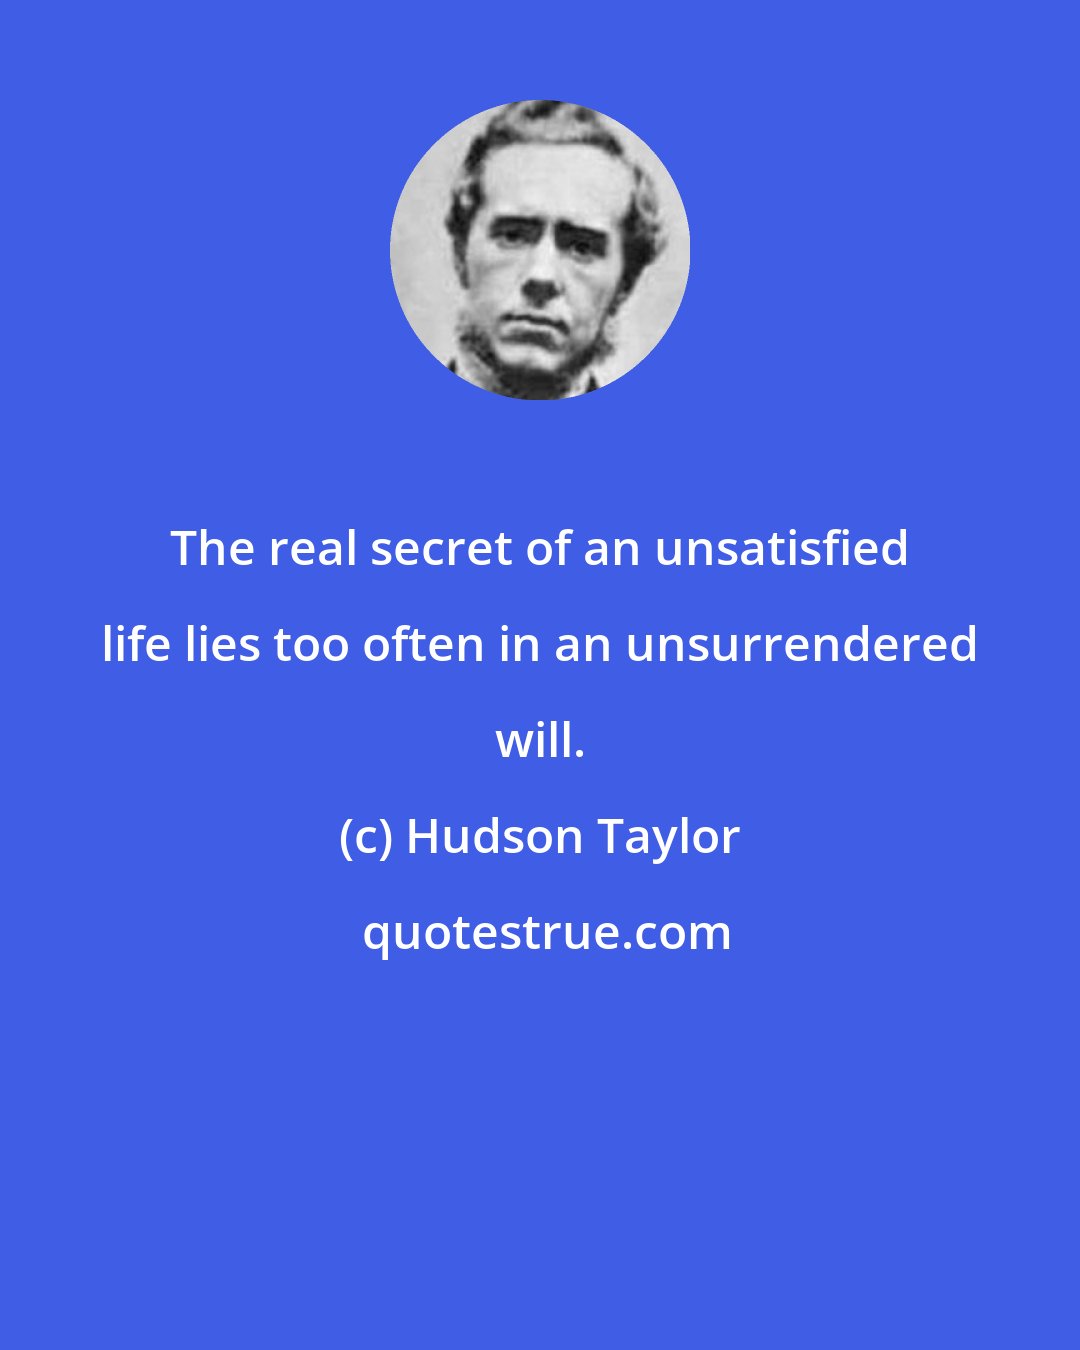 Hudson Taylor: The real secret of an unsatisfied life lies too often in an unsurrendered will.